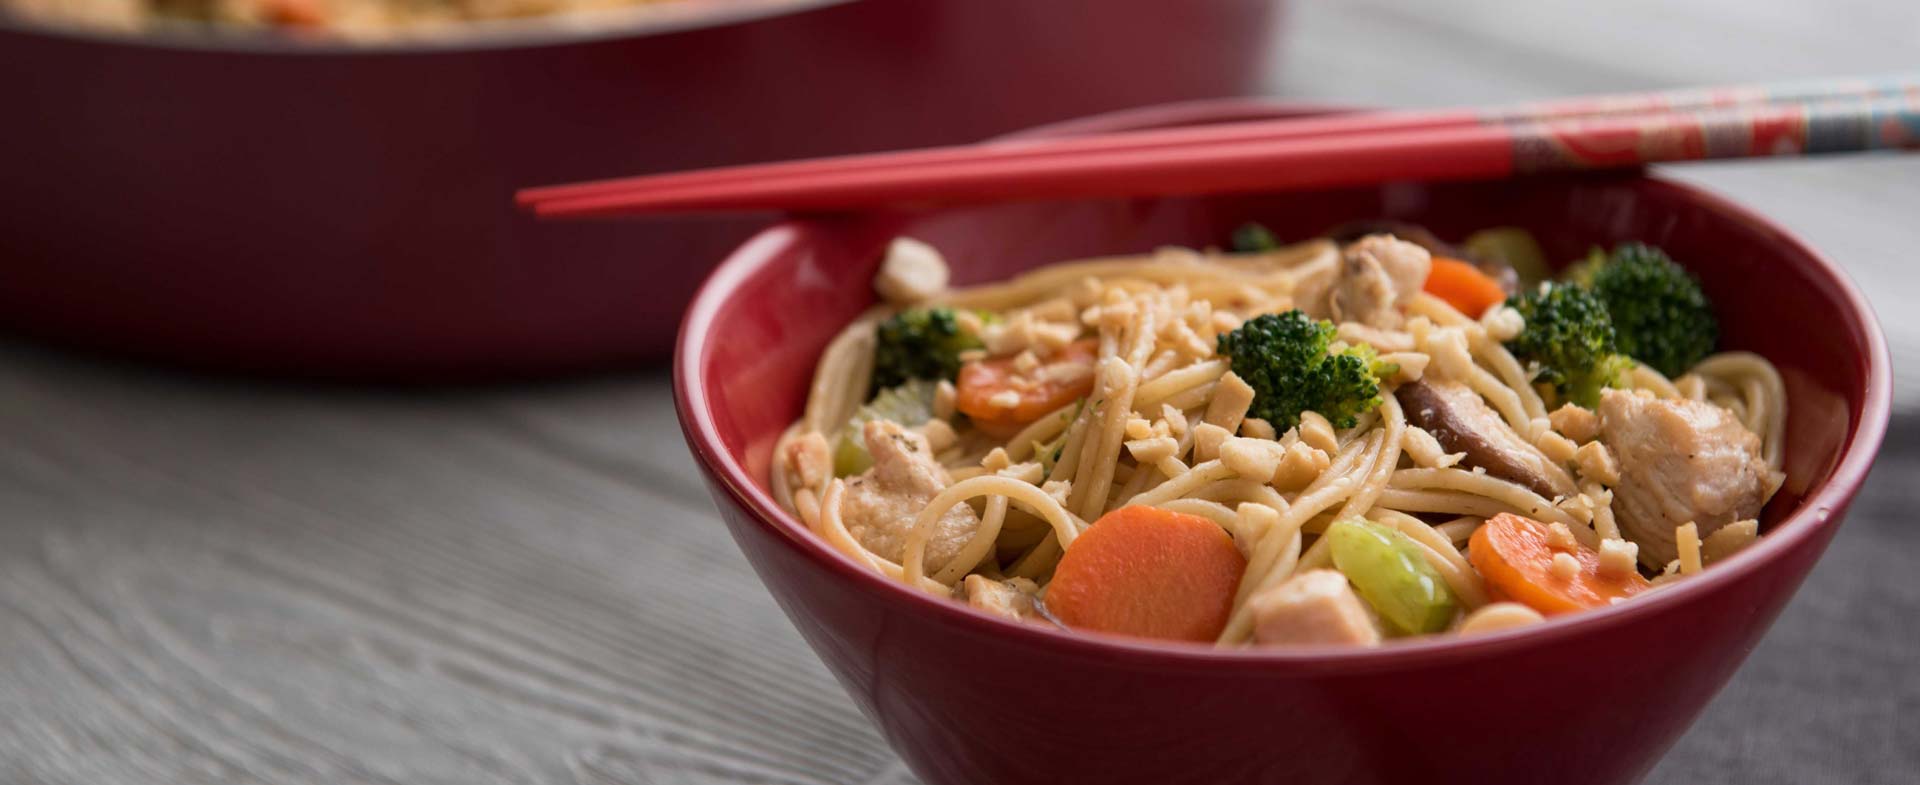 chicken and peanut lo mein horizontal with pan